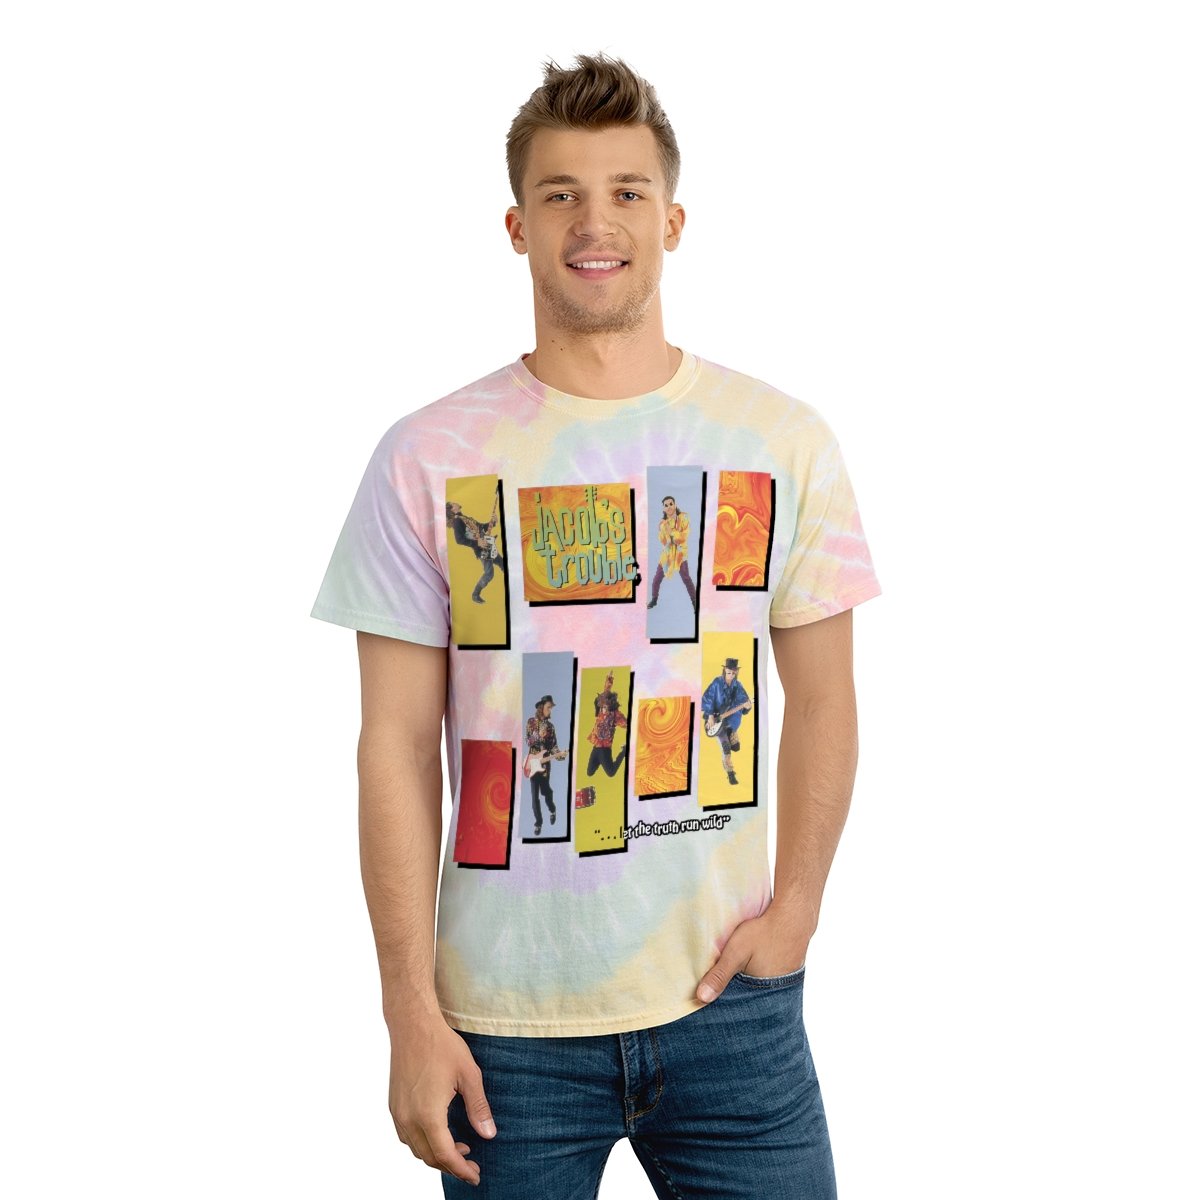 Jacob’s Trouble – “let the truth run wild” Tie-Dye Short Sleeve Tshirt S500